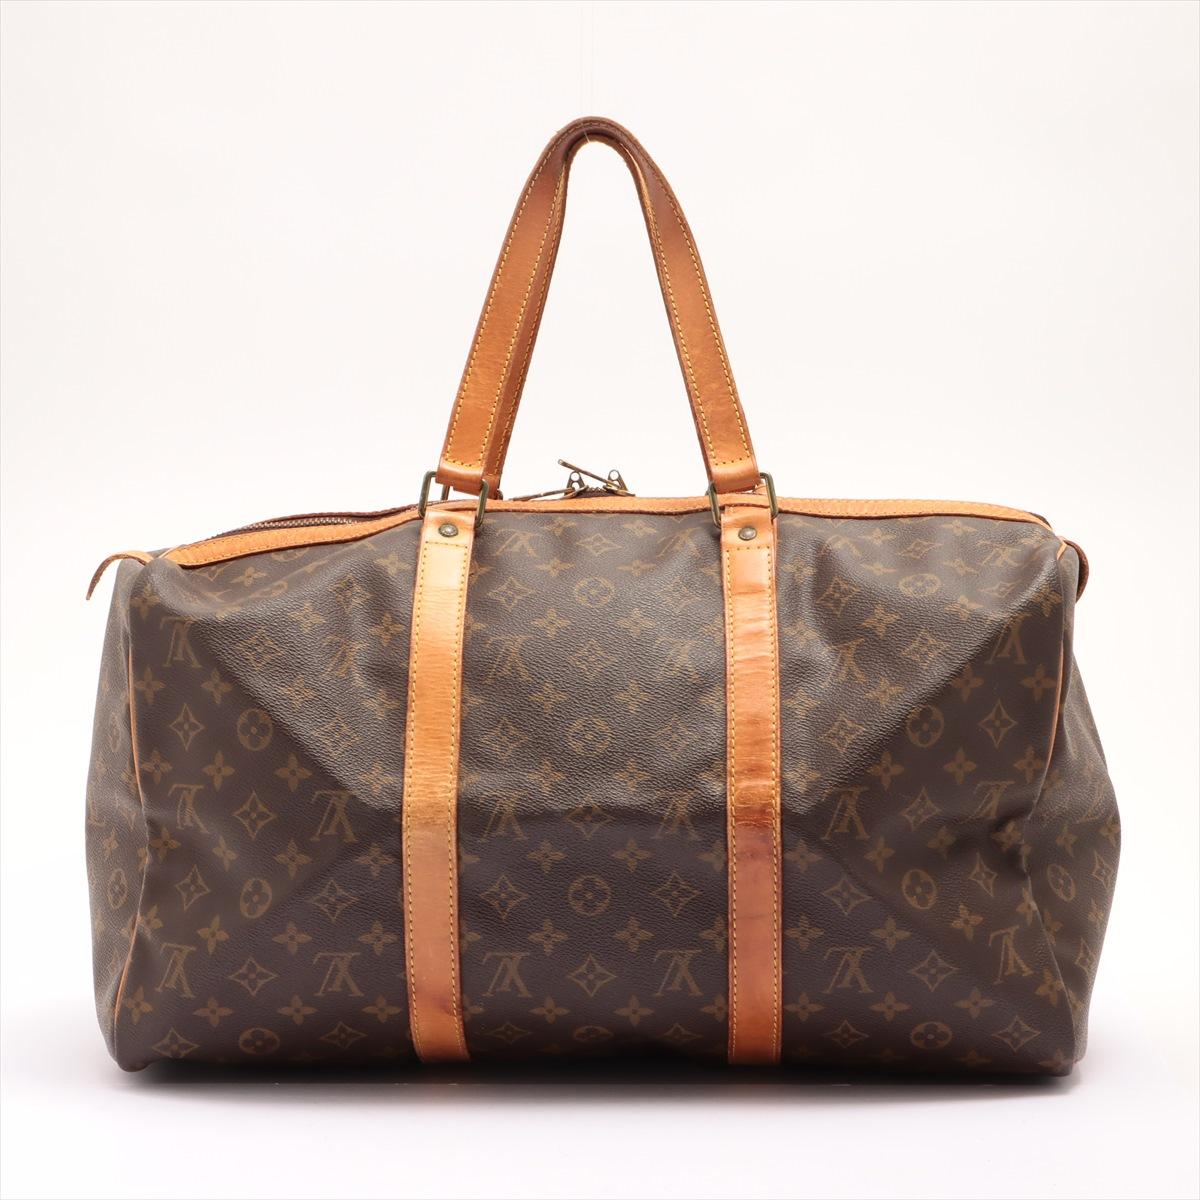 Brown and tan Monogram coated canvas Louis Vuitton Sac Souple 45 cm duffle bag with gold-tone hardware, tan vachetta leather trim, dual flat shoulder straps, brown canvas lining and two-way zip closure at top.

 

67908MSC